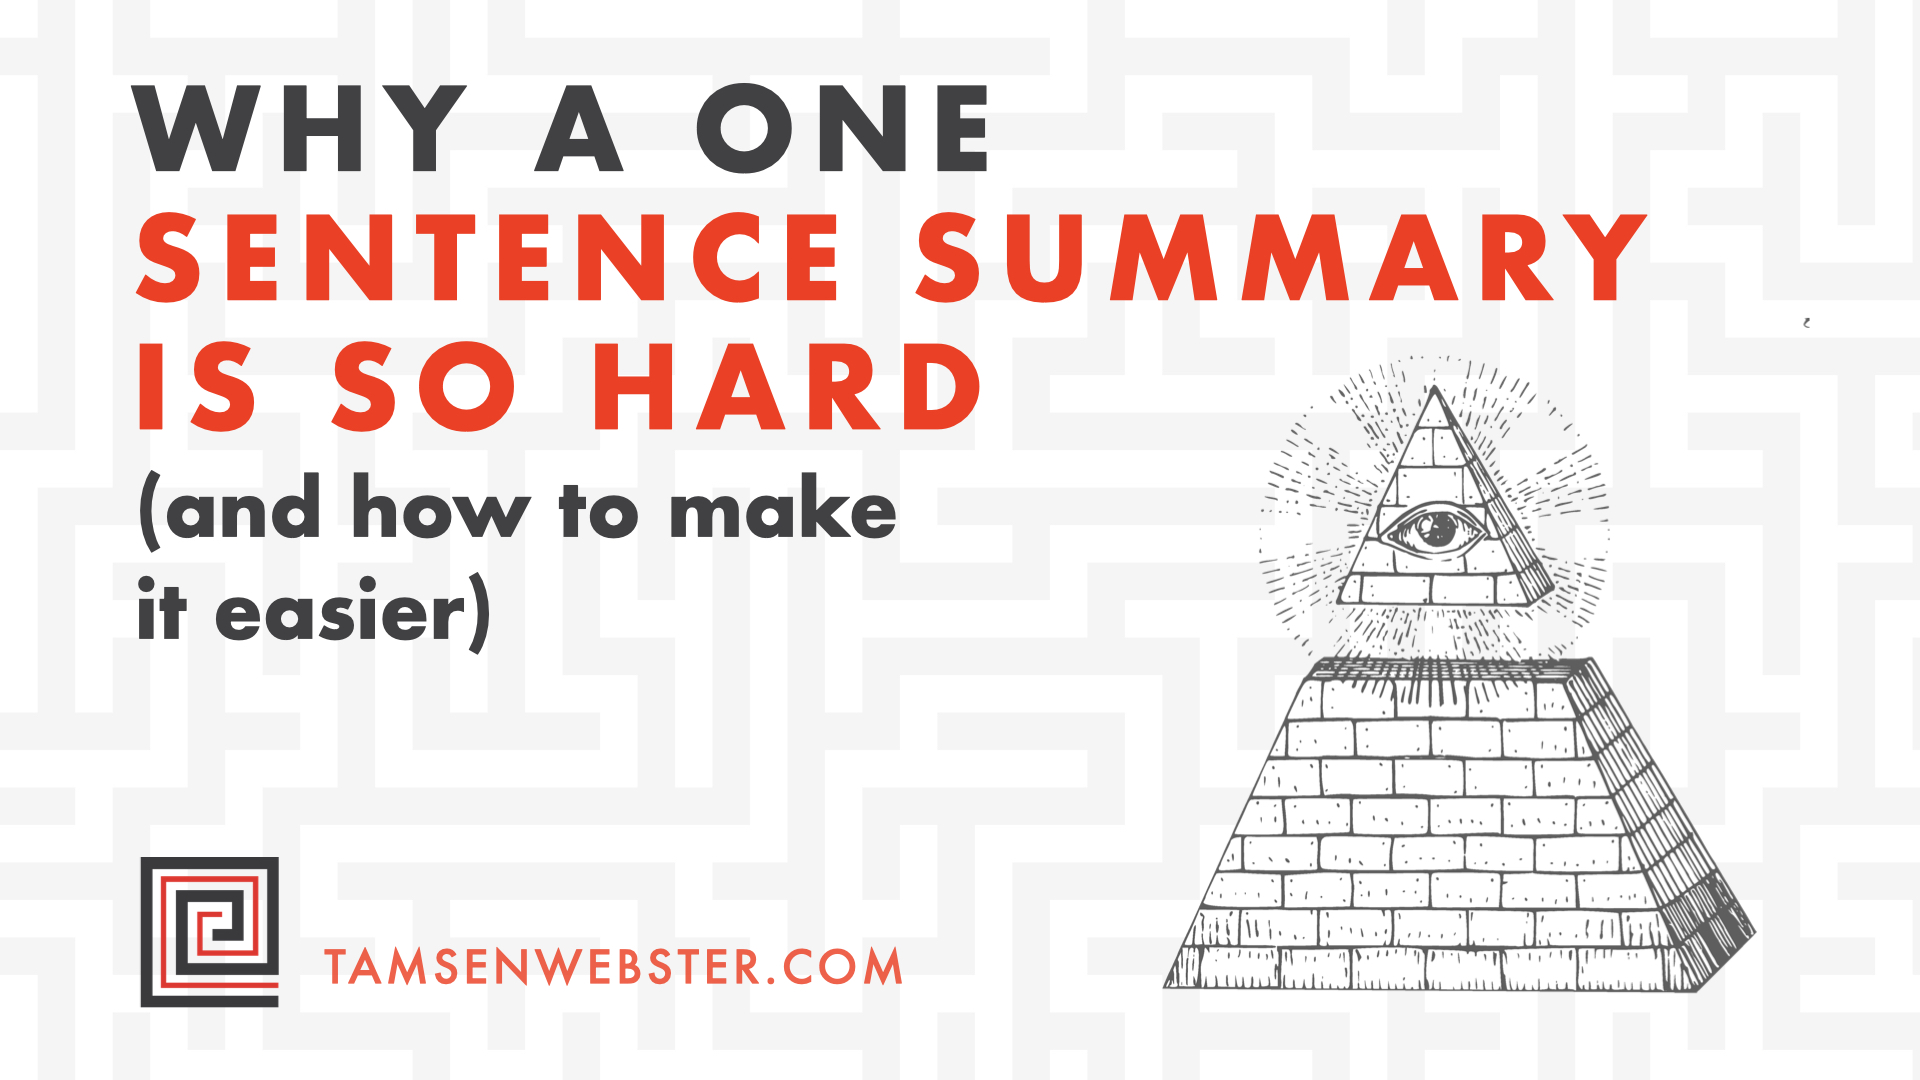 why-a-one-sentence-summary-is-so-hard-and-how-to-make-it-easier